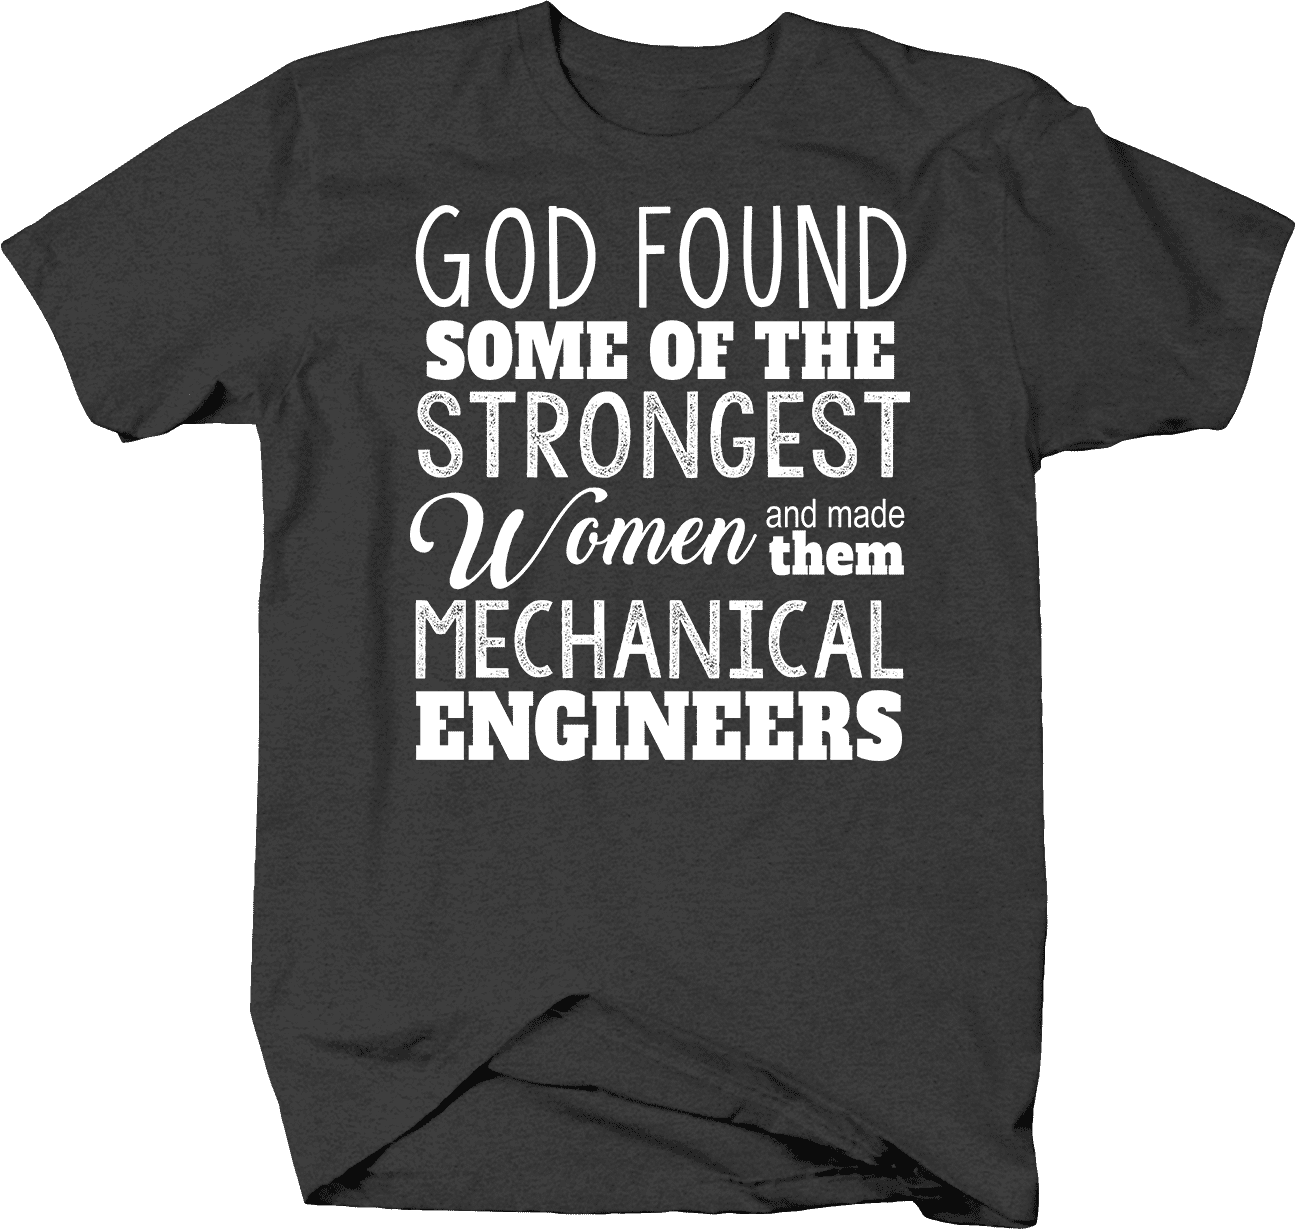 Details about   God Found Women Strongest Mechanical Engineers t-shirt 